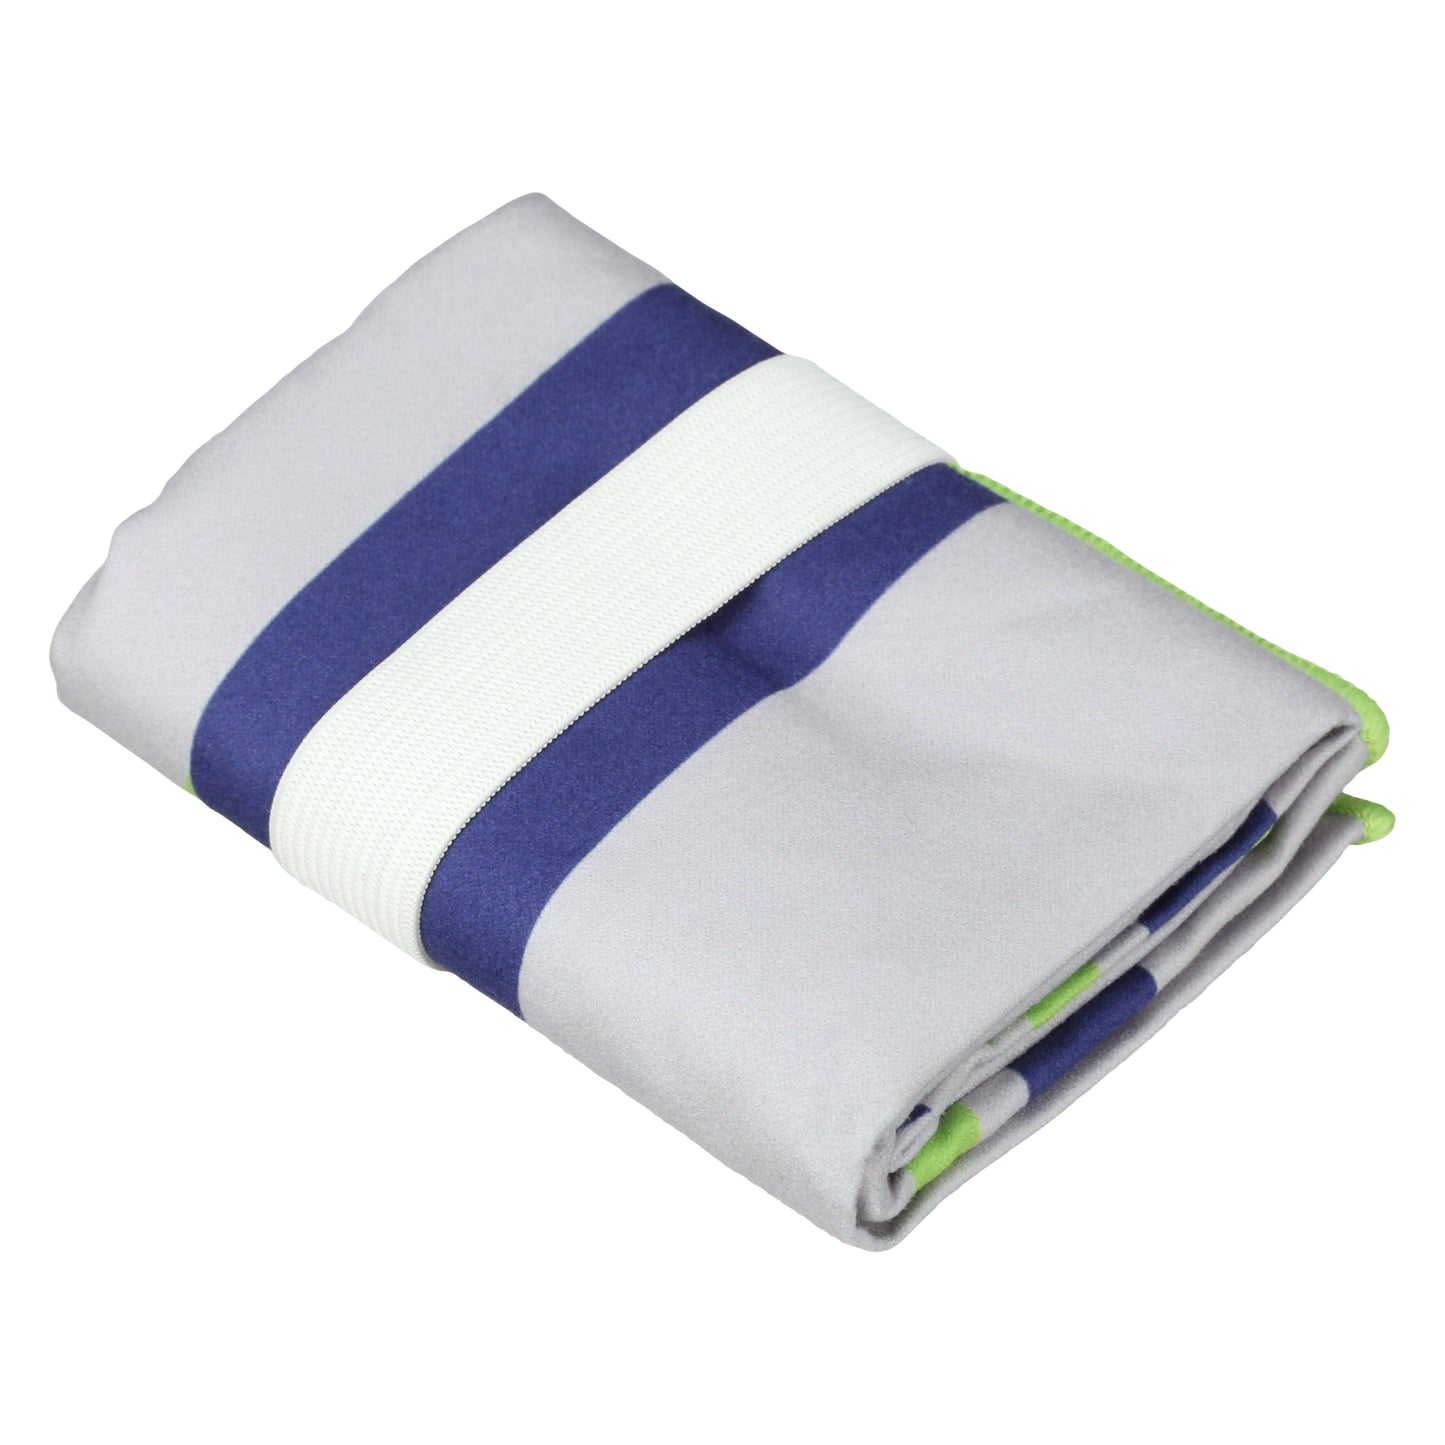 Navy and Lime Striped New Court Pickleball Towel folded